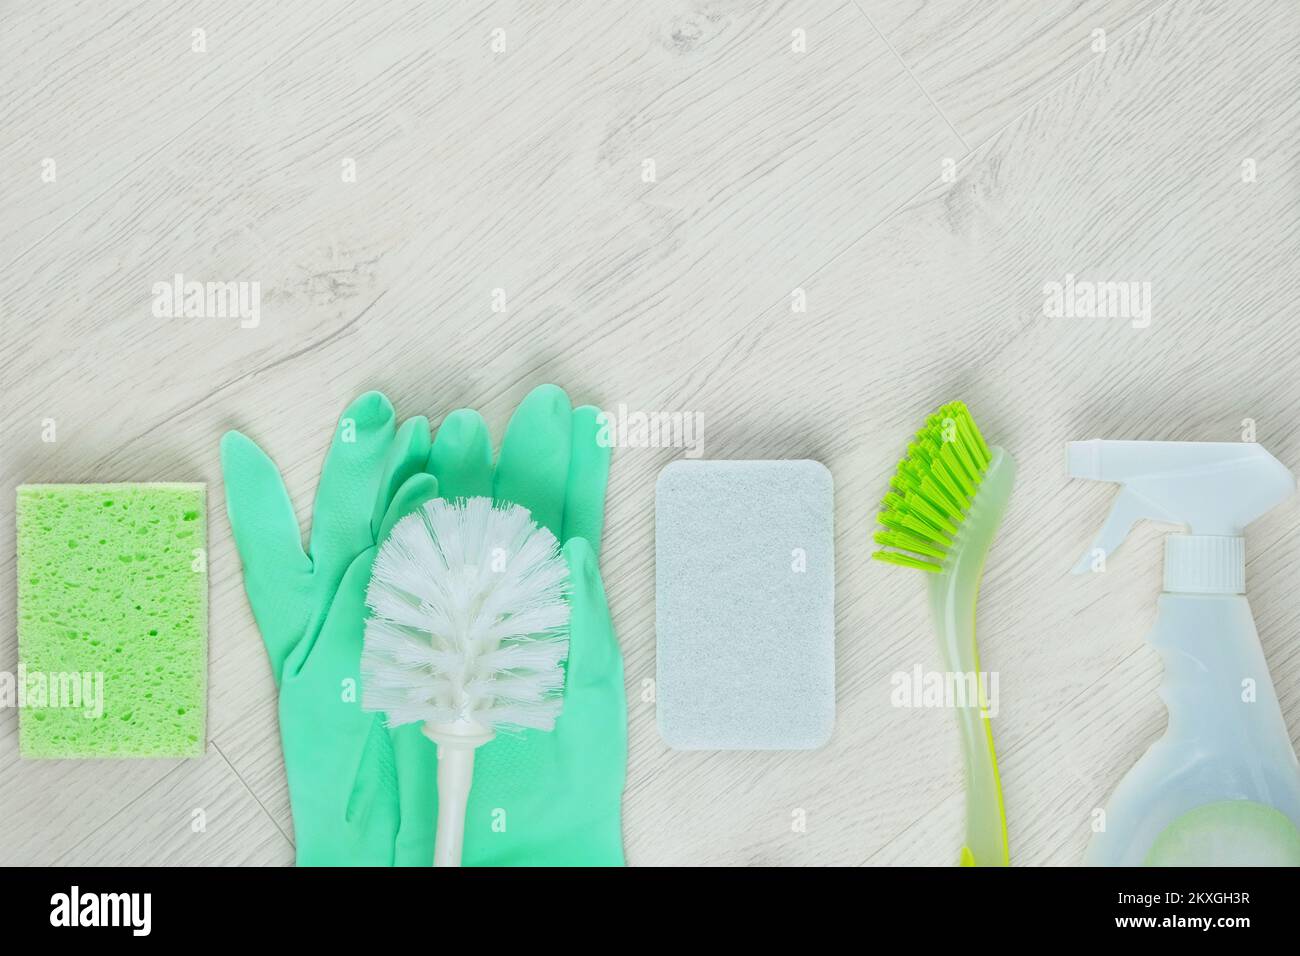 Stack of cleaning sponges and bottle with a cleaning agent. Service concept and cleaning accessories. Stock Photo